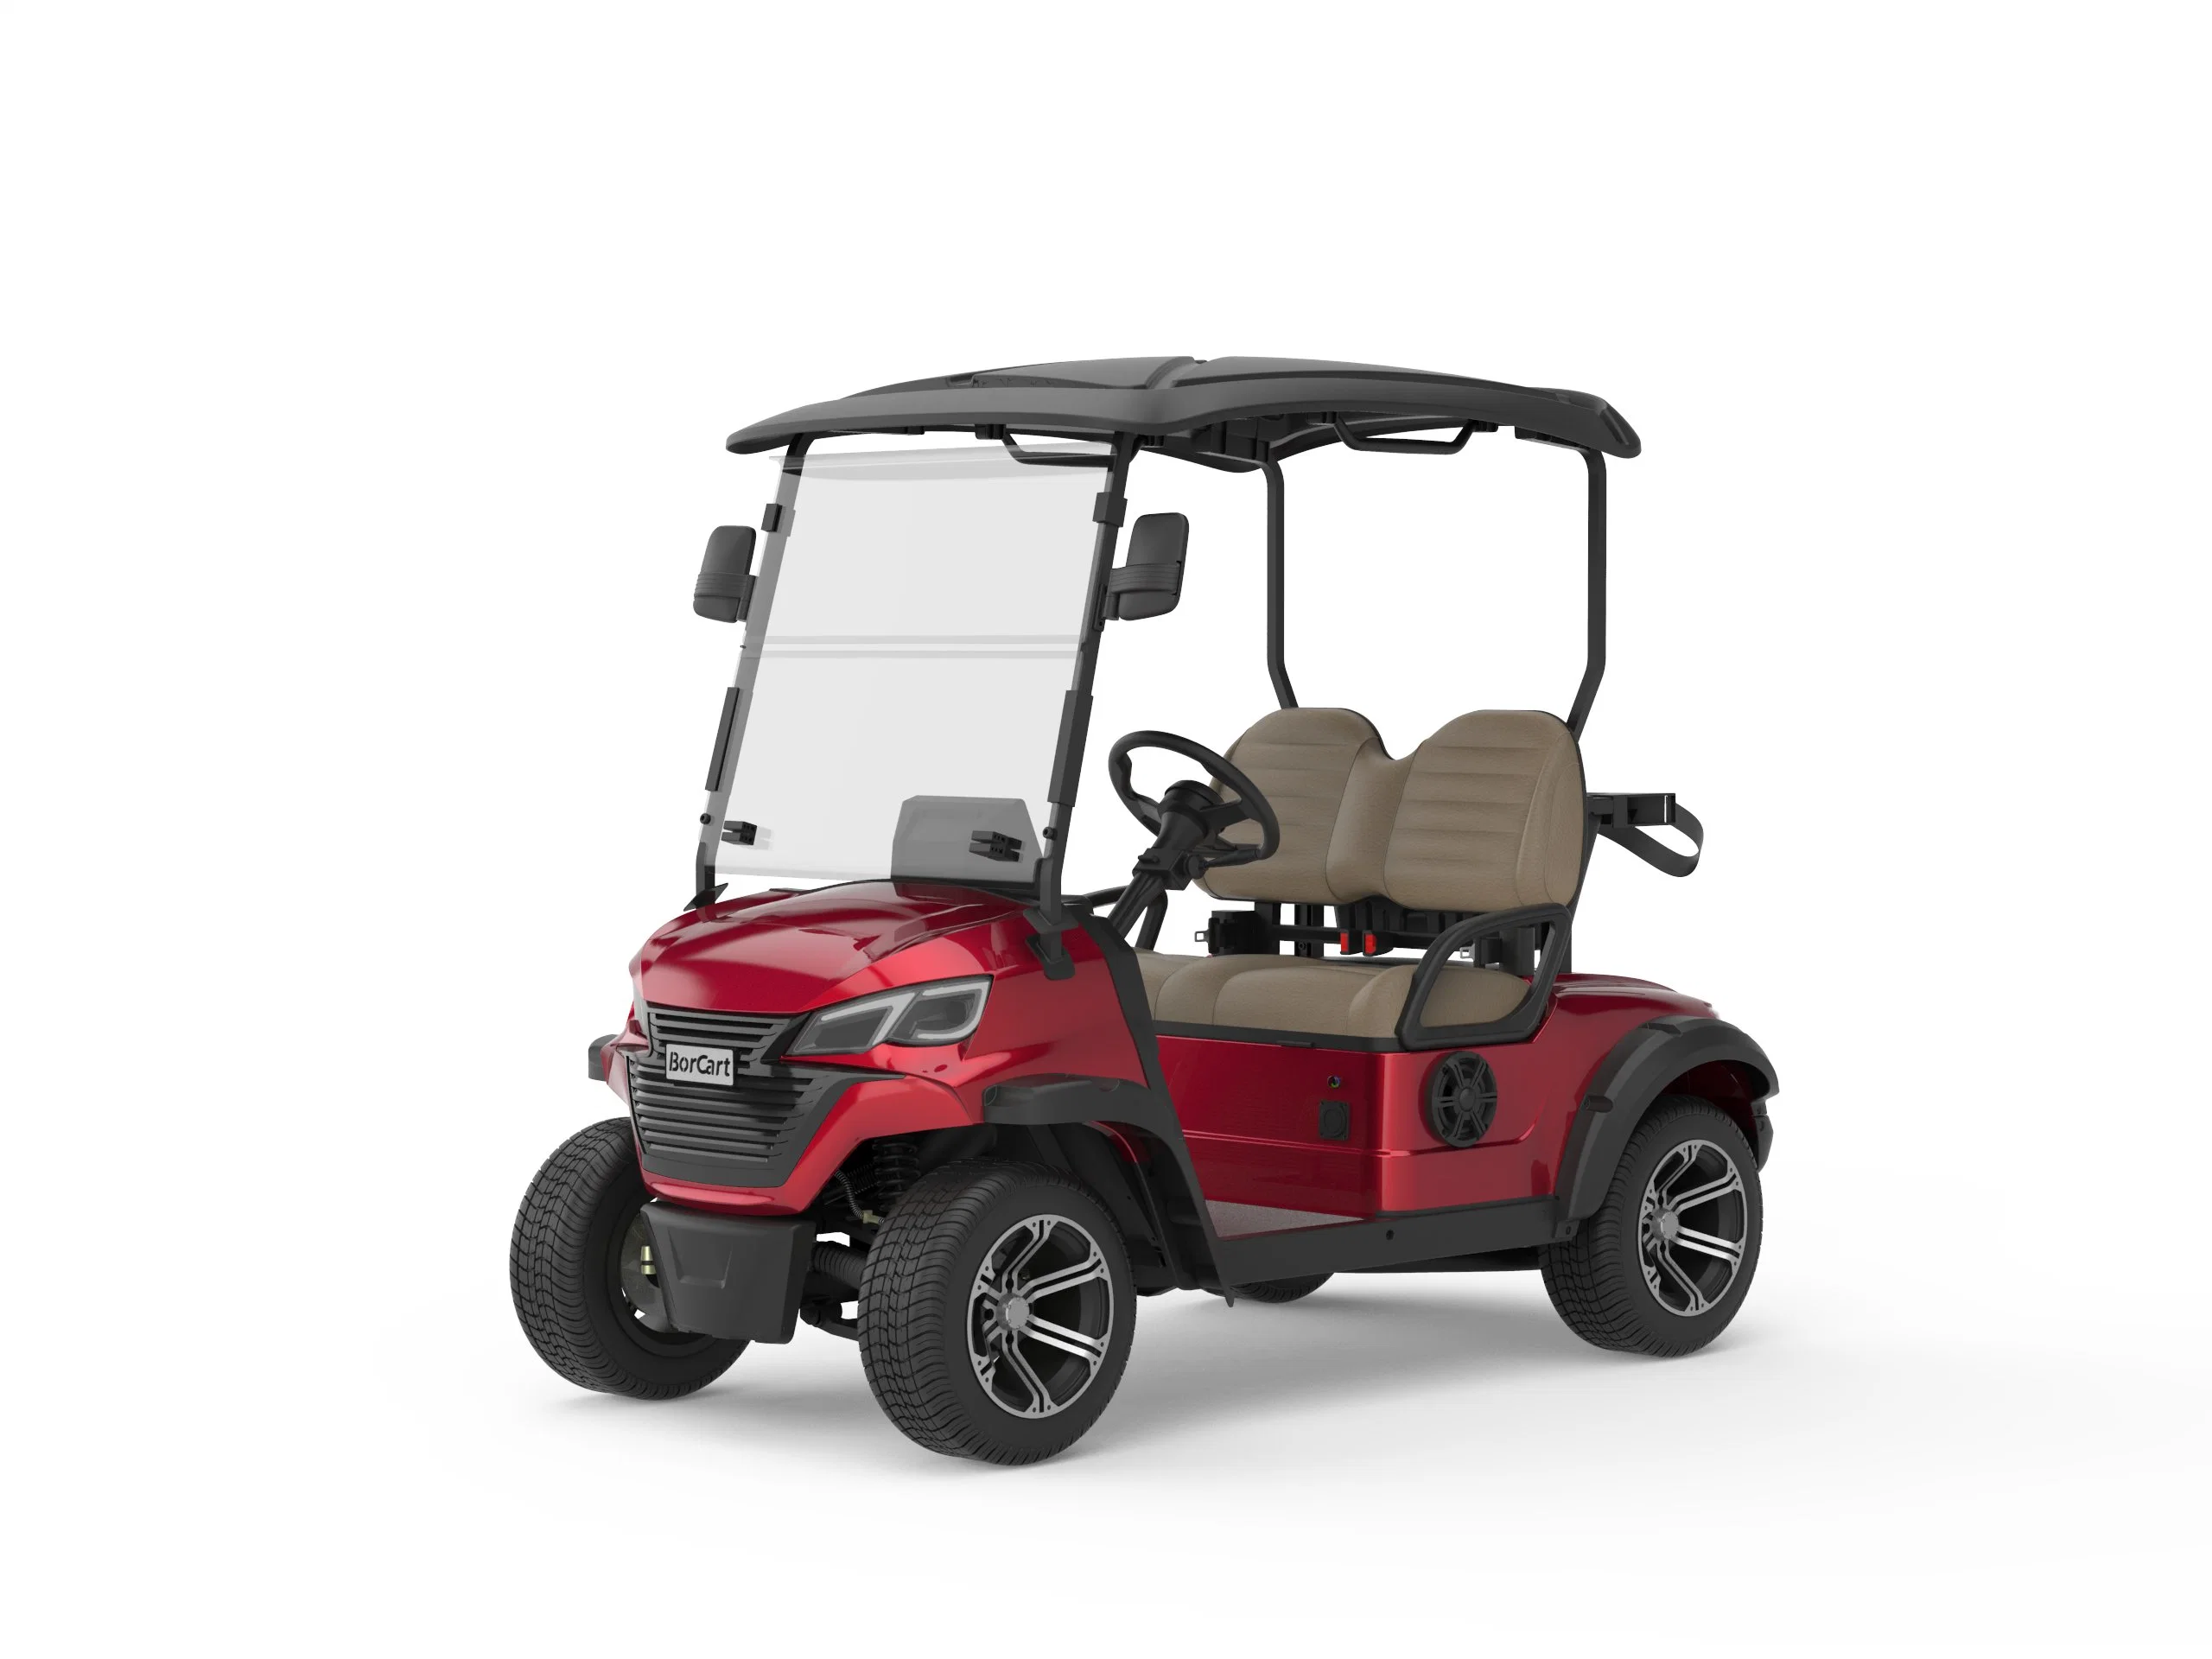 New Mold Electric Golf Cart 4 Disc Brakes New 2 Seater Golf Carts Club Car